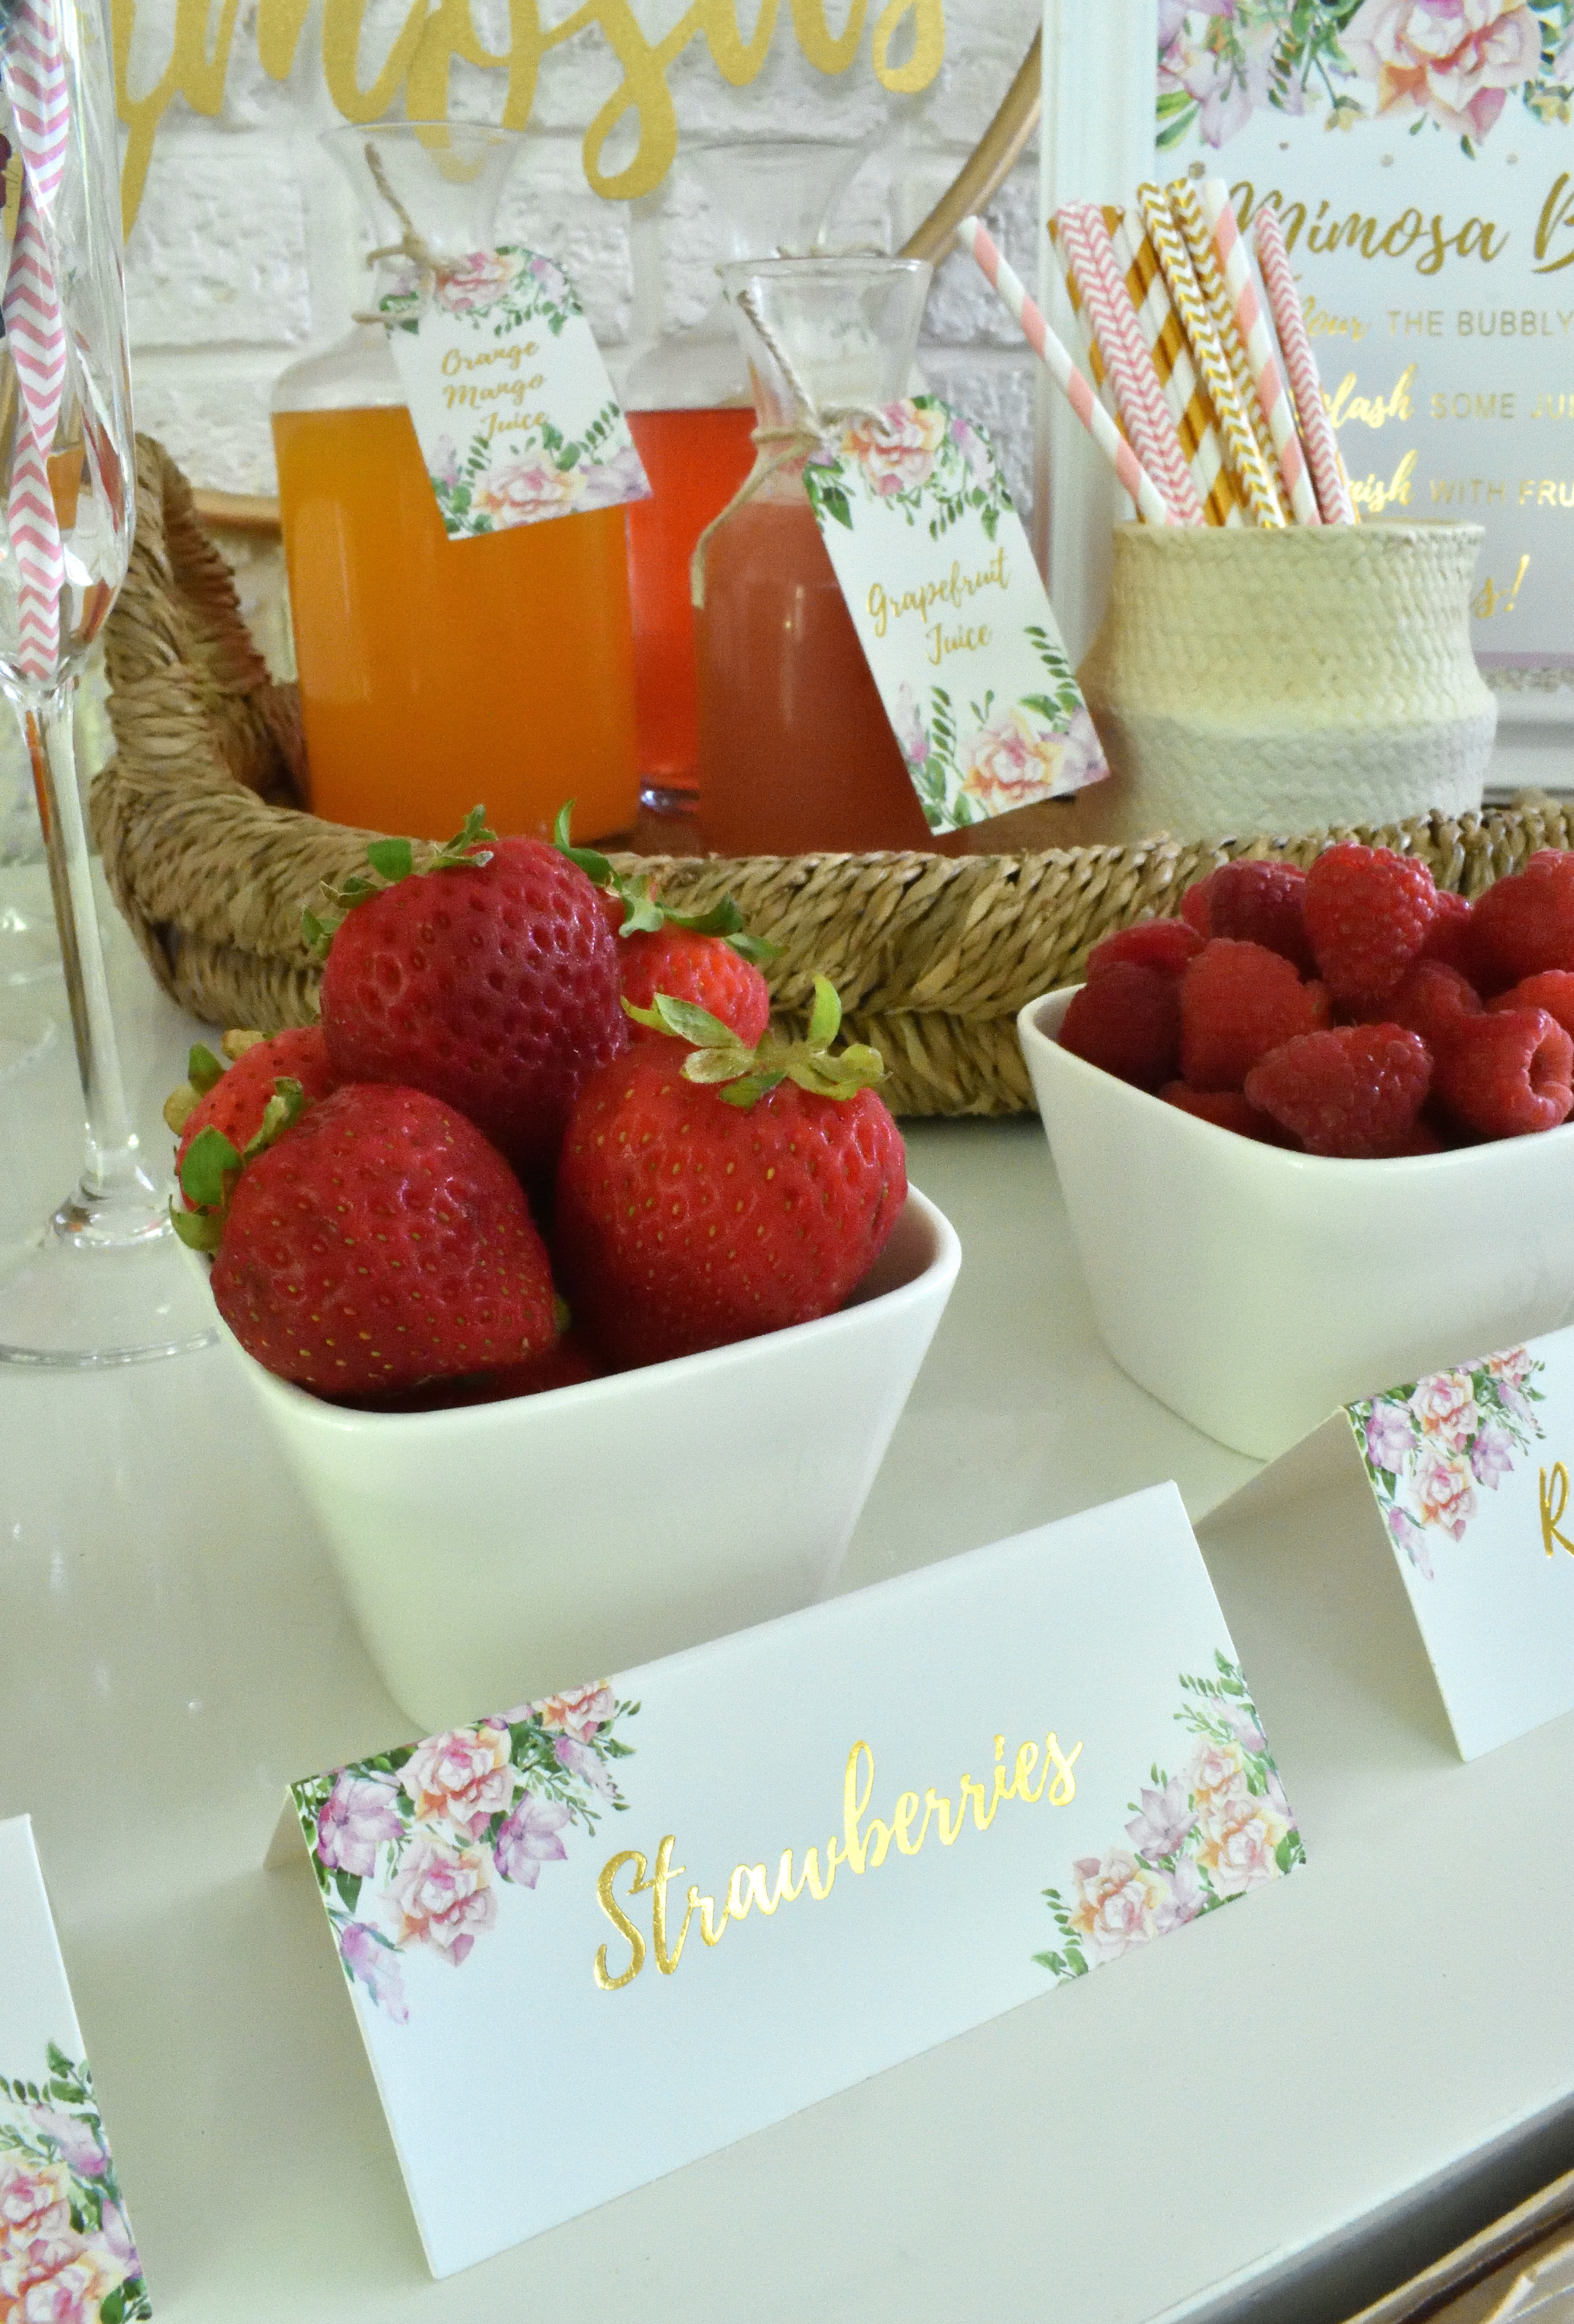 Easy mimosa bar styling that's perfect for any festive event!